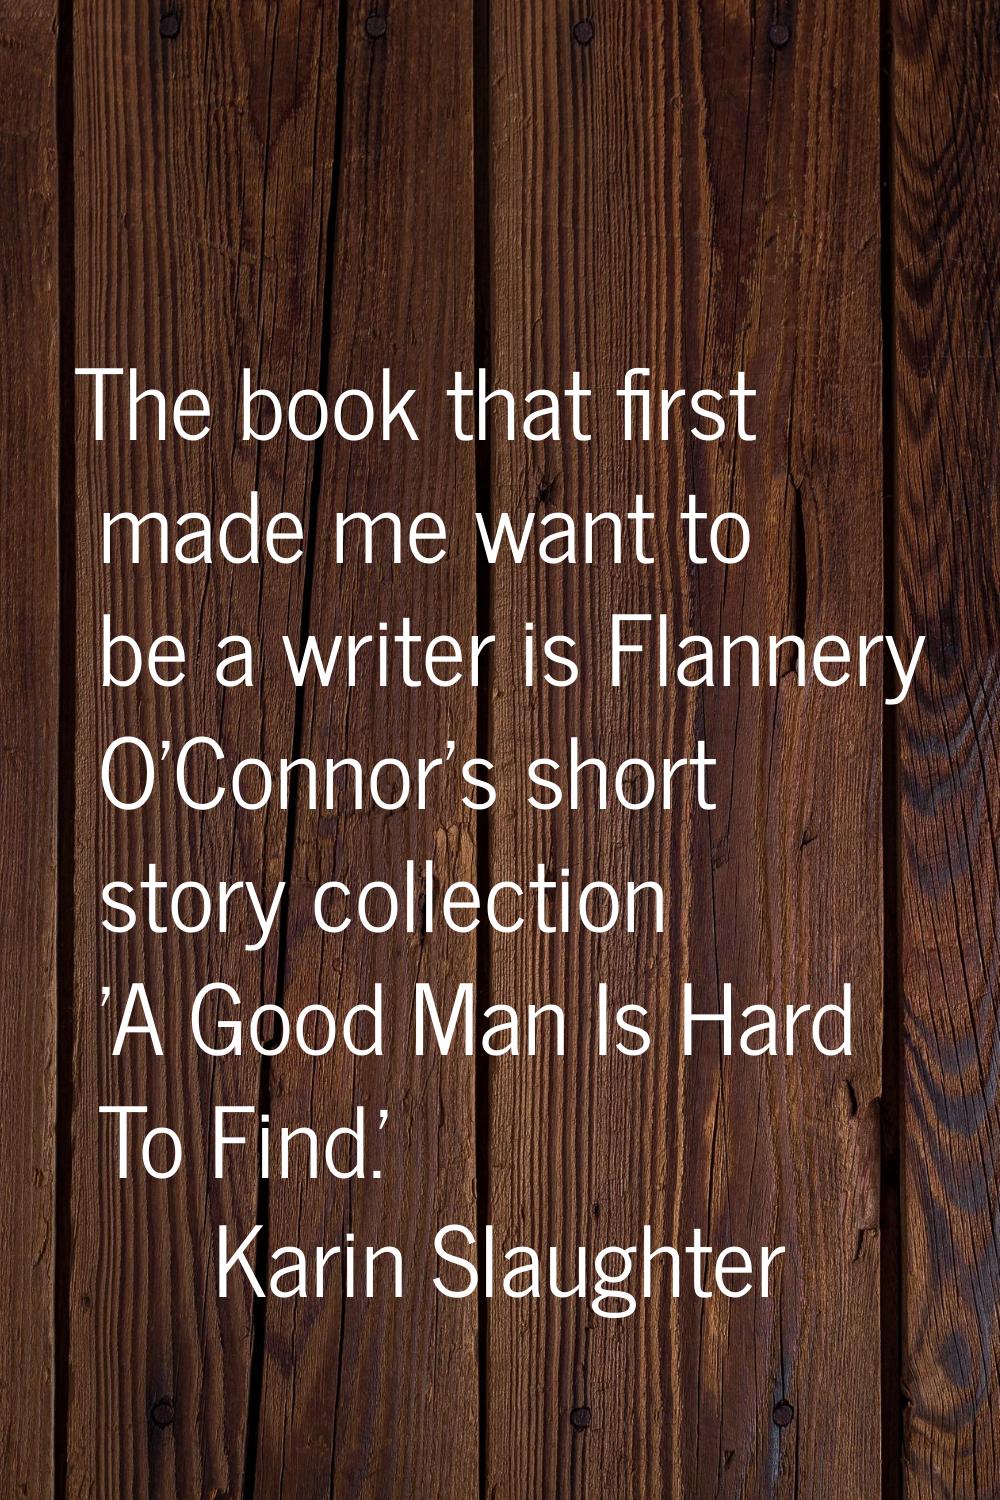 The book that first made me want to be a writer is Flannery O'Connor's short story collection 'A Go